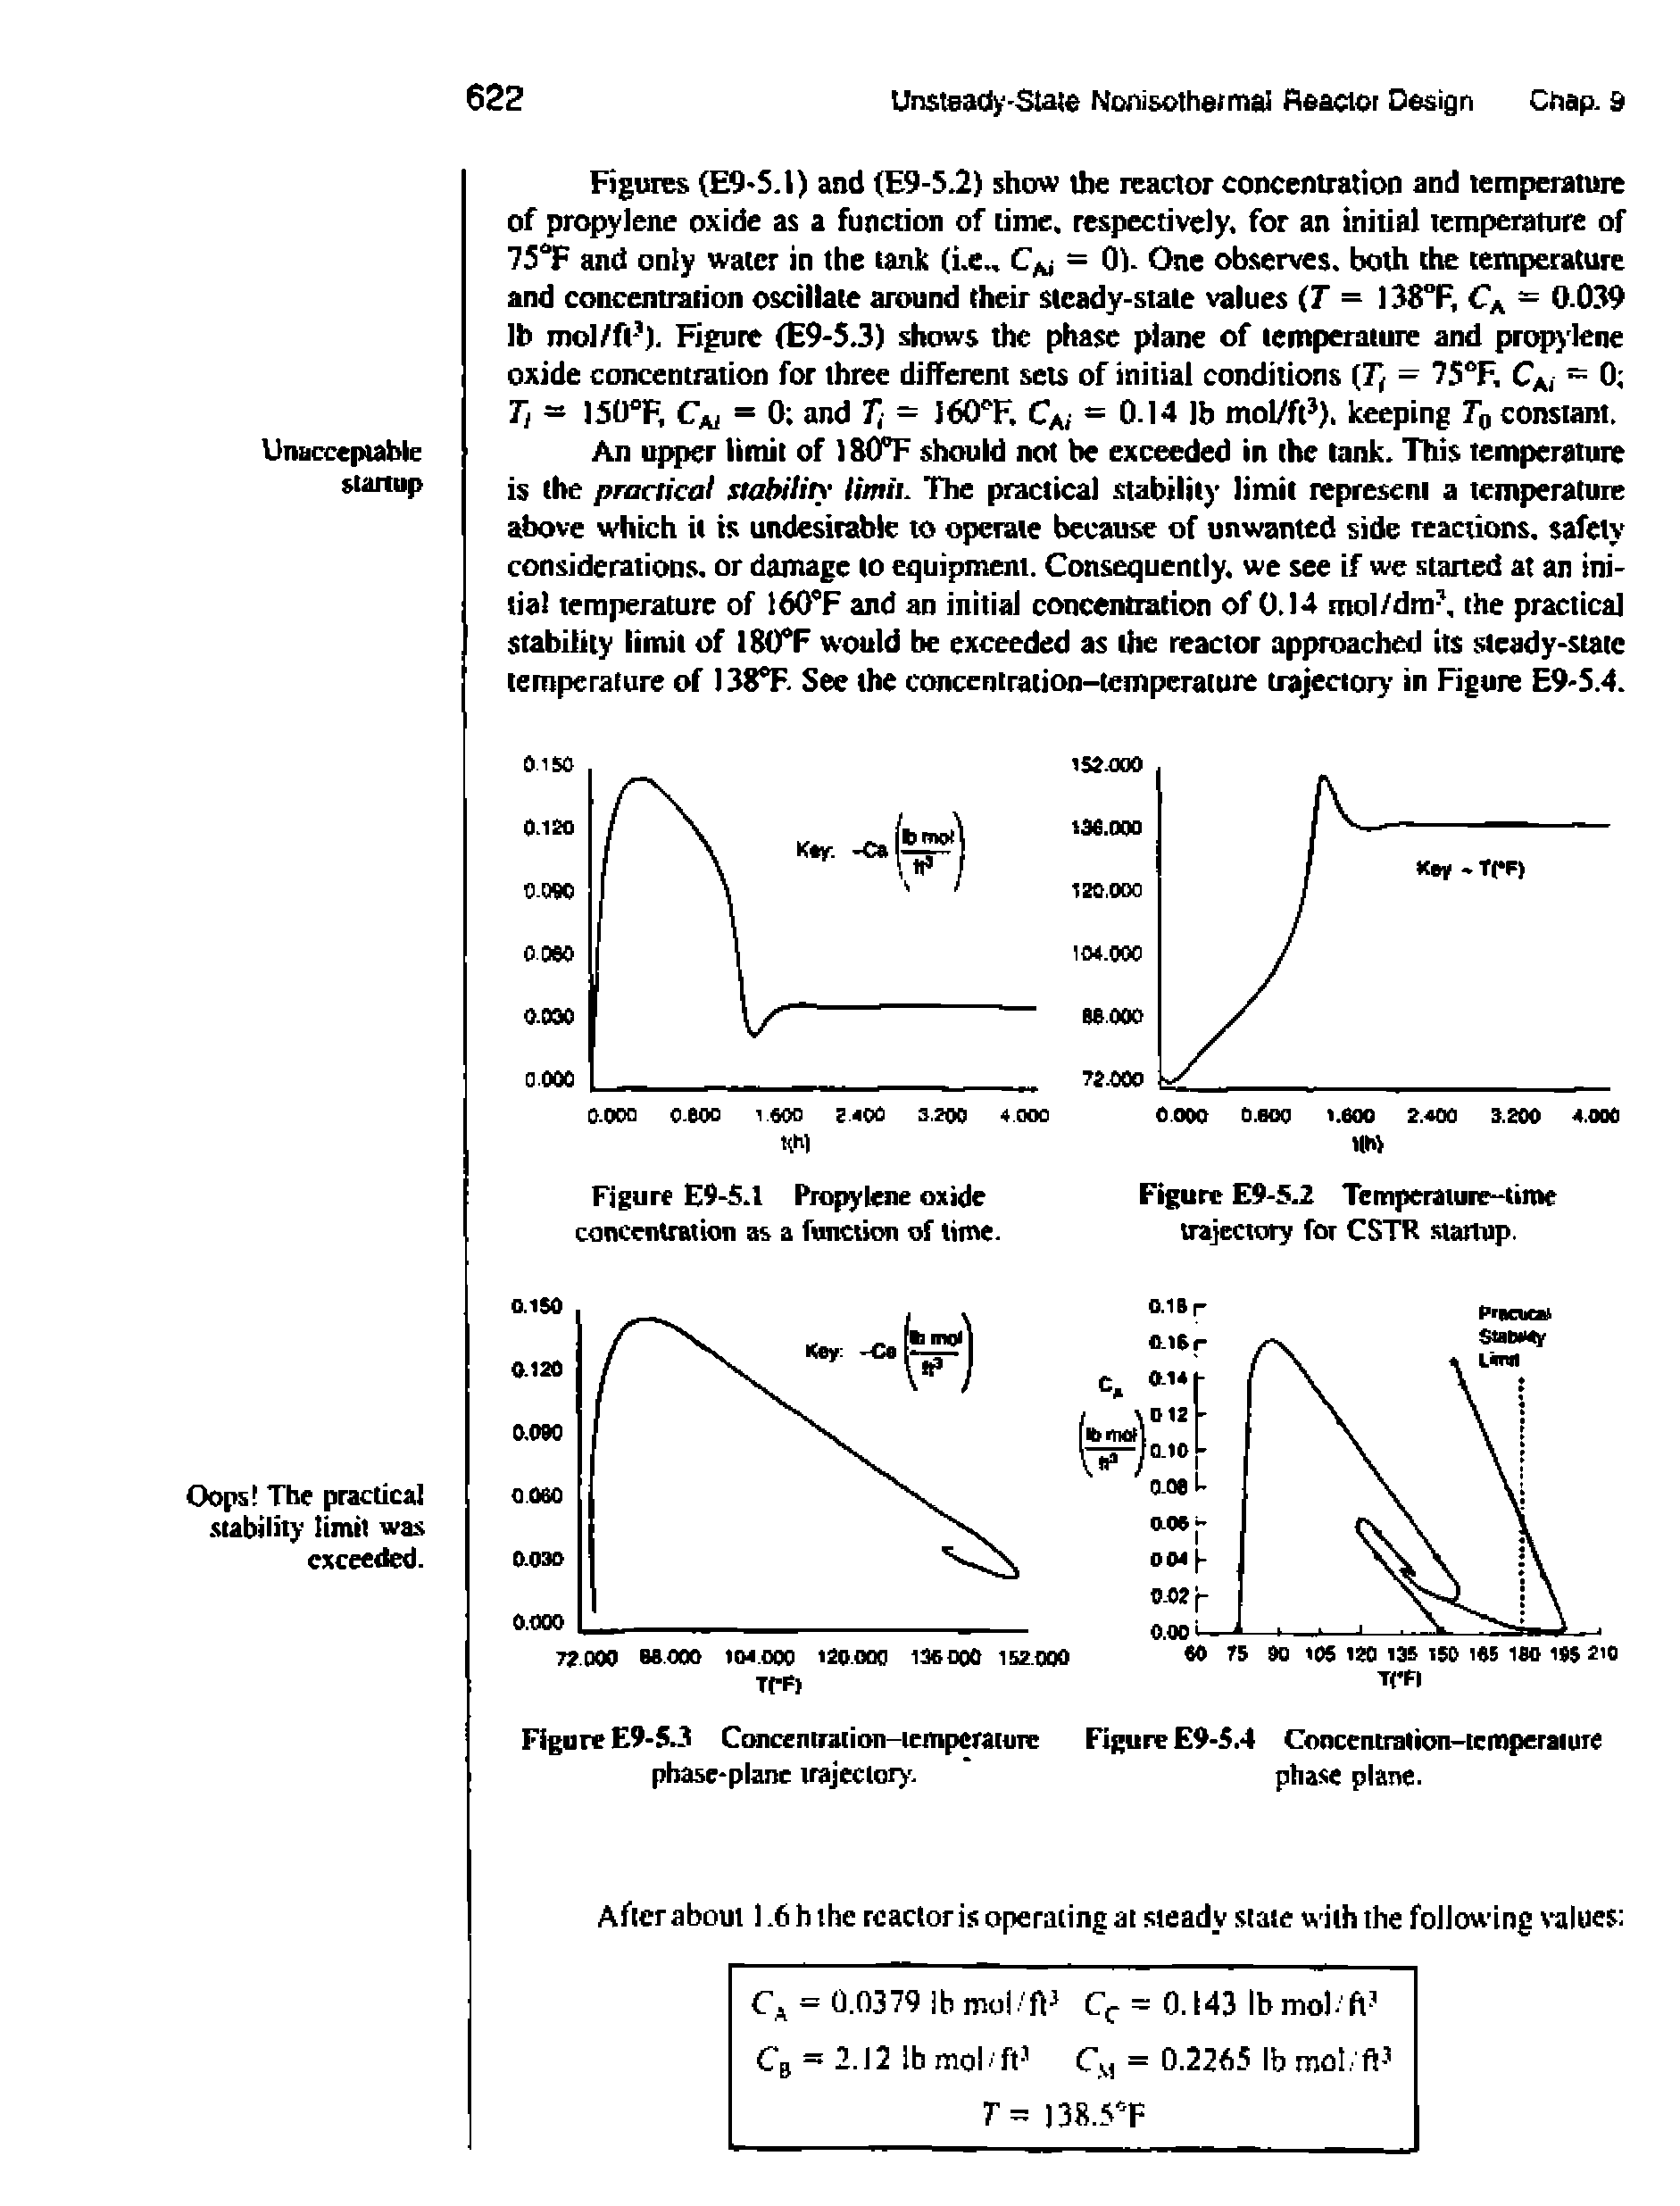 Figures (E9-S.I) and <E9-5.2) show the reactor concentration and temperature of propylene oxide as a function of time, respectively, for an initial temperature of 75 F and only water in the tank (i.e.. Cf = 0). One observes, both the temperature and concentration oscillate around their steady-stale values (T = 138°F, Ca - 0.039 lb mol/ft- ). Figure (E9-5.3) shows the phase plane of temperature and propylene oxide concentration for three different sets of initial conditions Jj — 7S°F, Ca, = 0 Tj — 150 F, Caj = 0 and Ti = 160. Ca = 0.14 lb mol/ft ). keeping Tq constant.